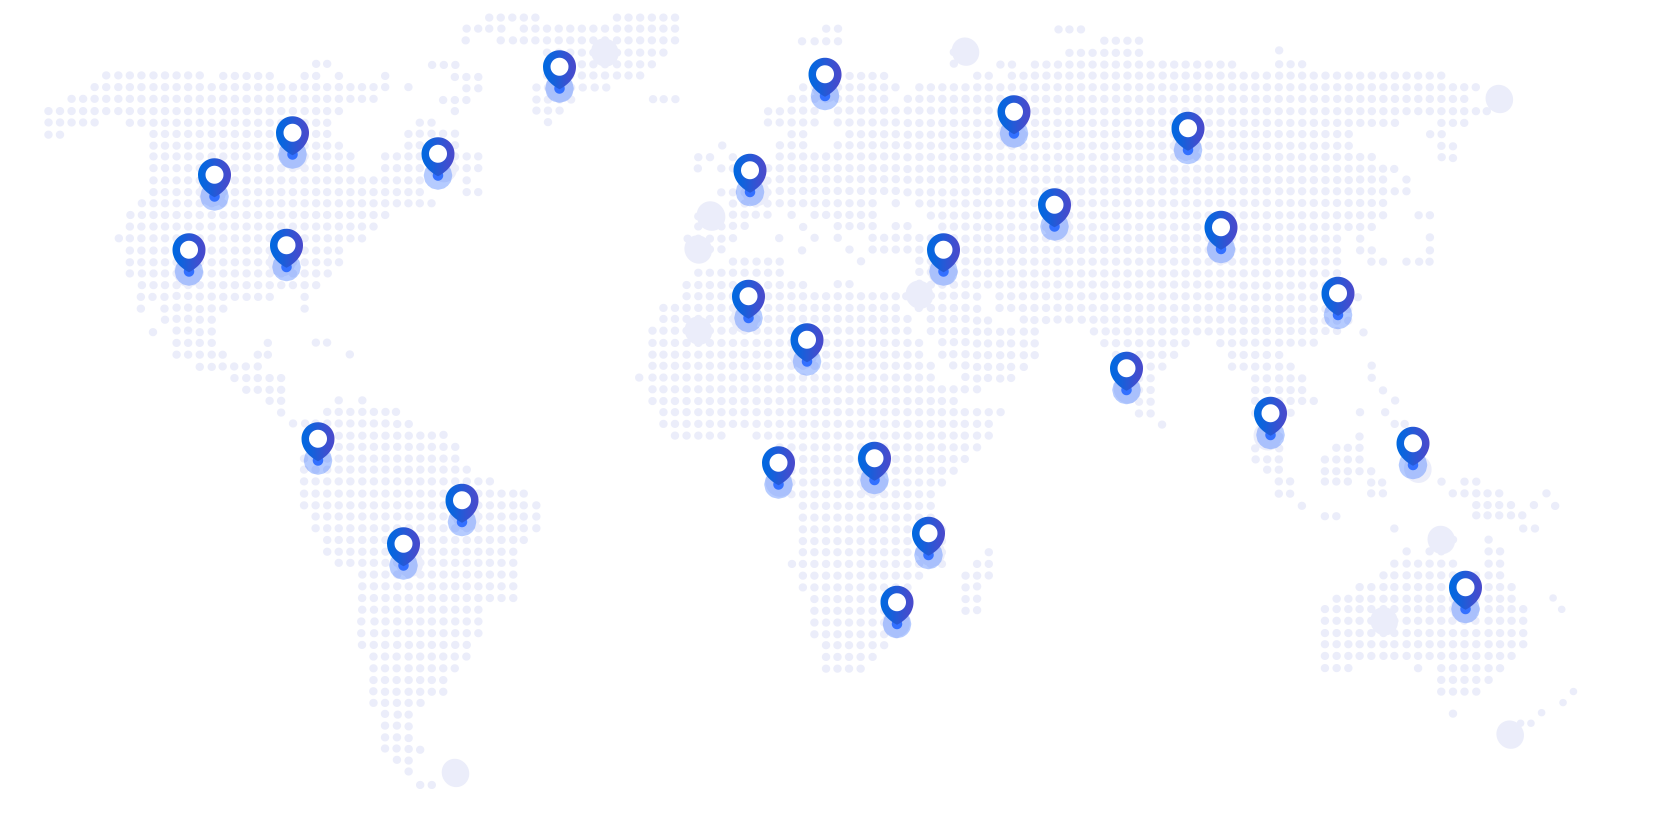 More than 100 countries using MOHO